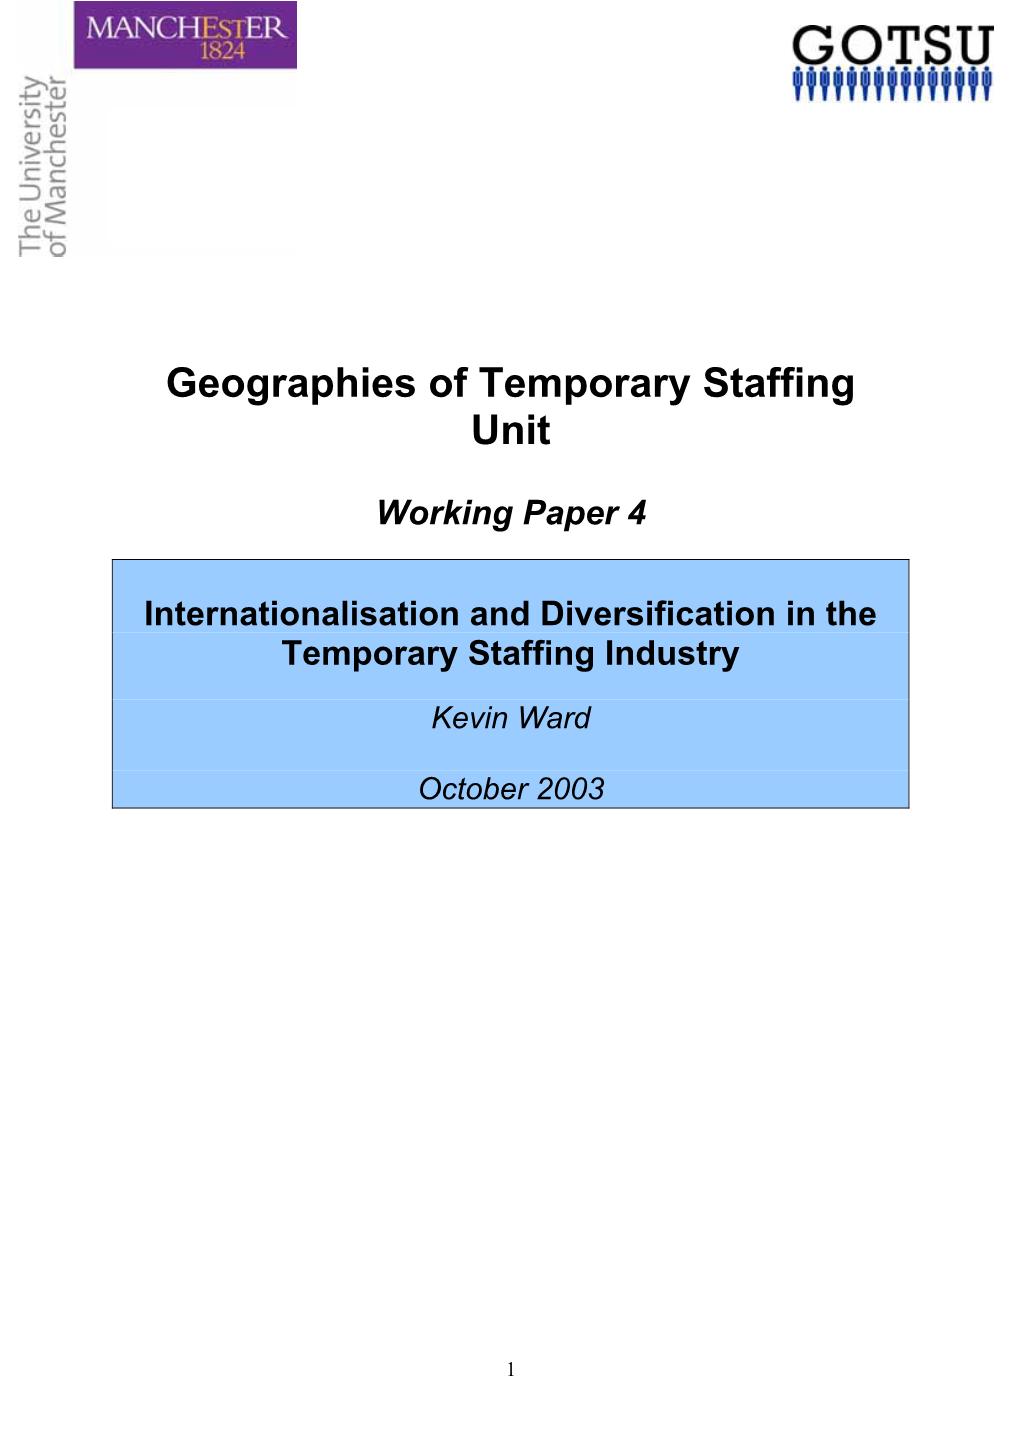 Internationalisation and Diversification in the Temporary Staffing Industry